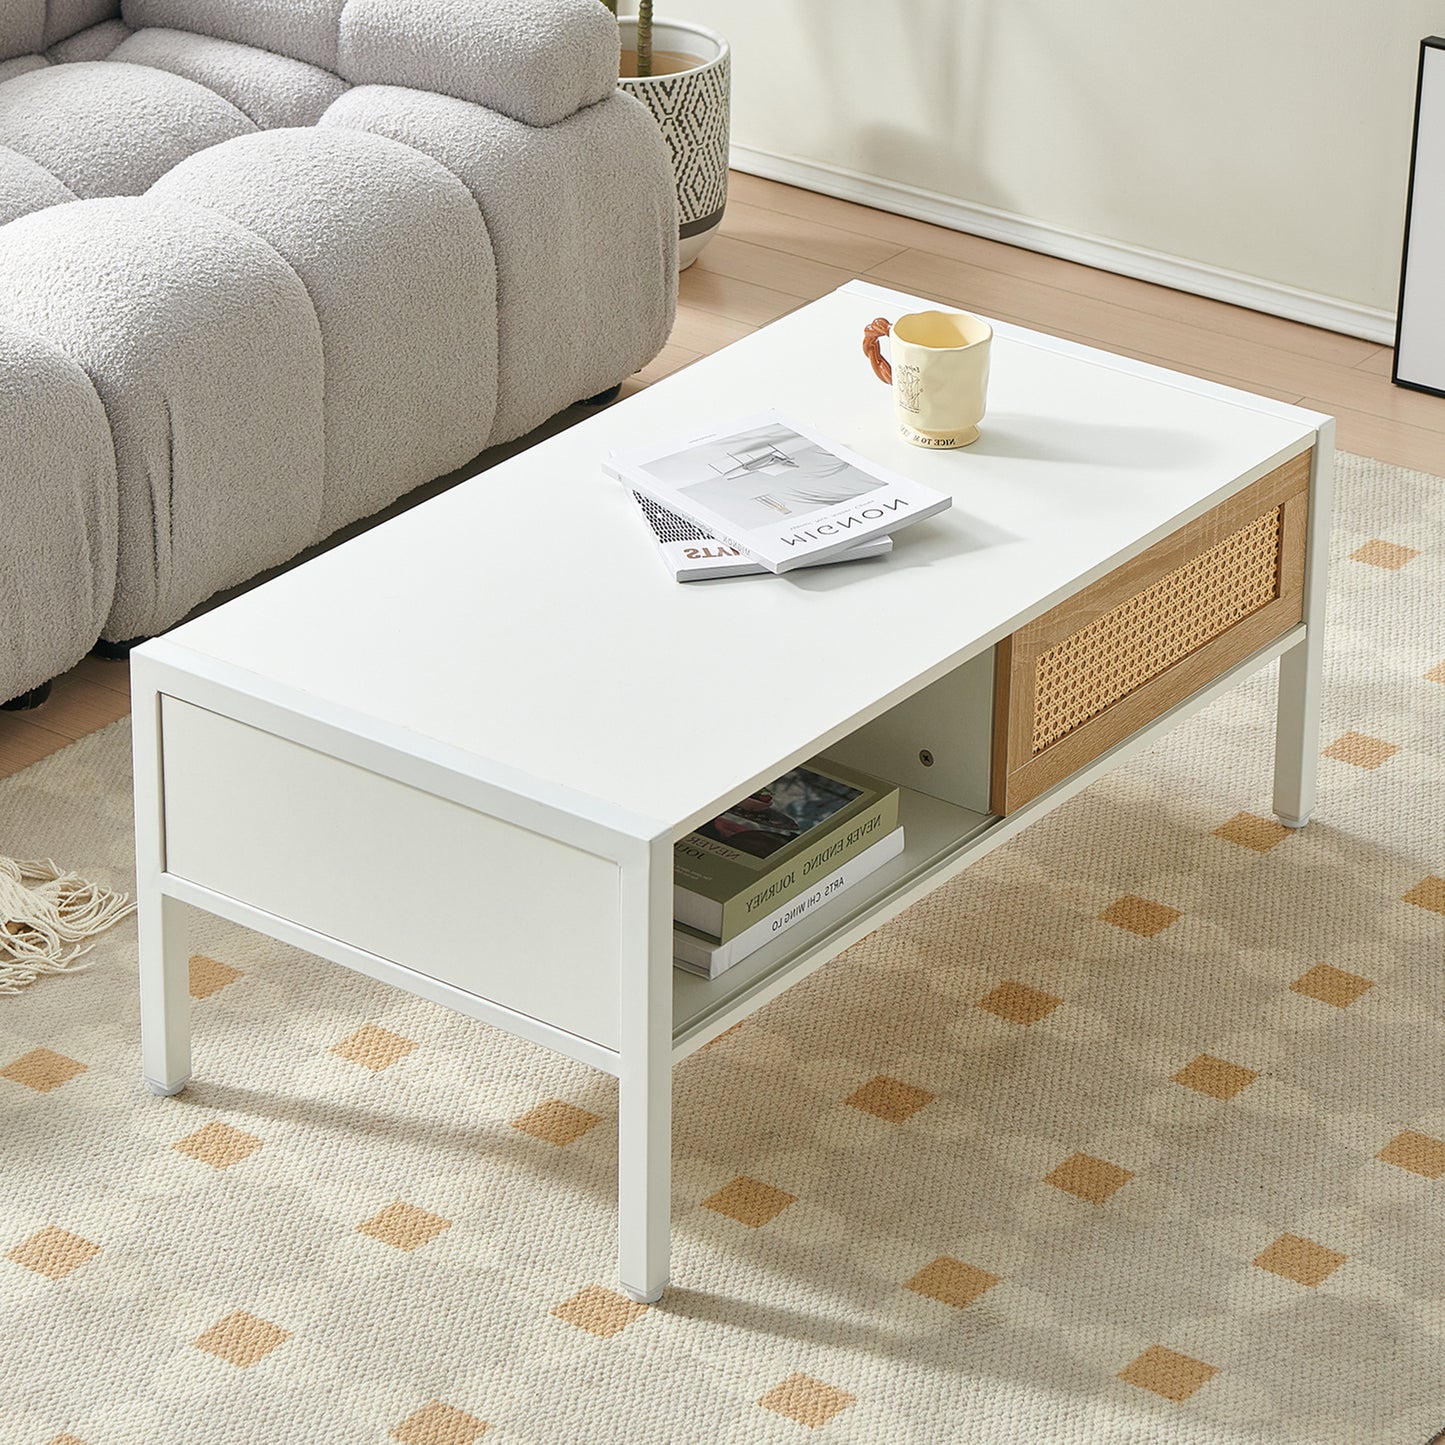 Smart FENDEE Rattan Coffee Table with Sliding Door Storage and Metal Leg for Living Room